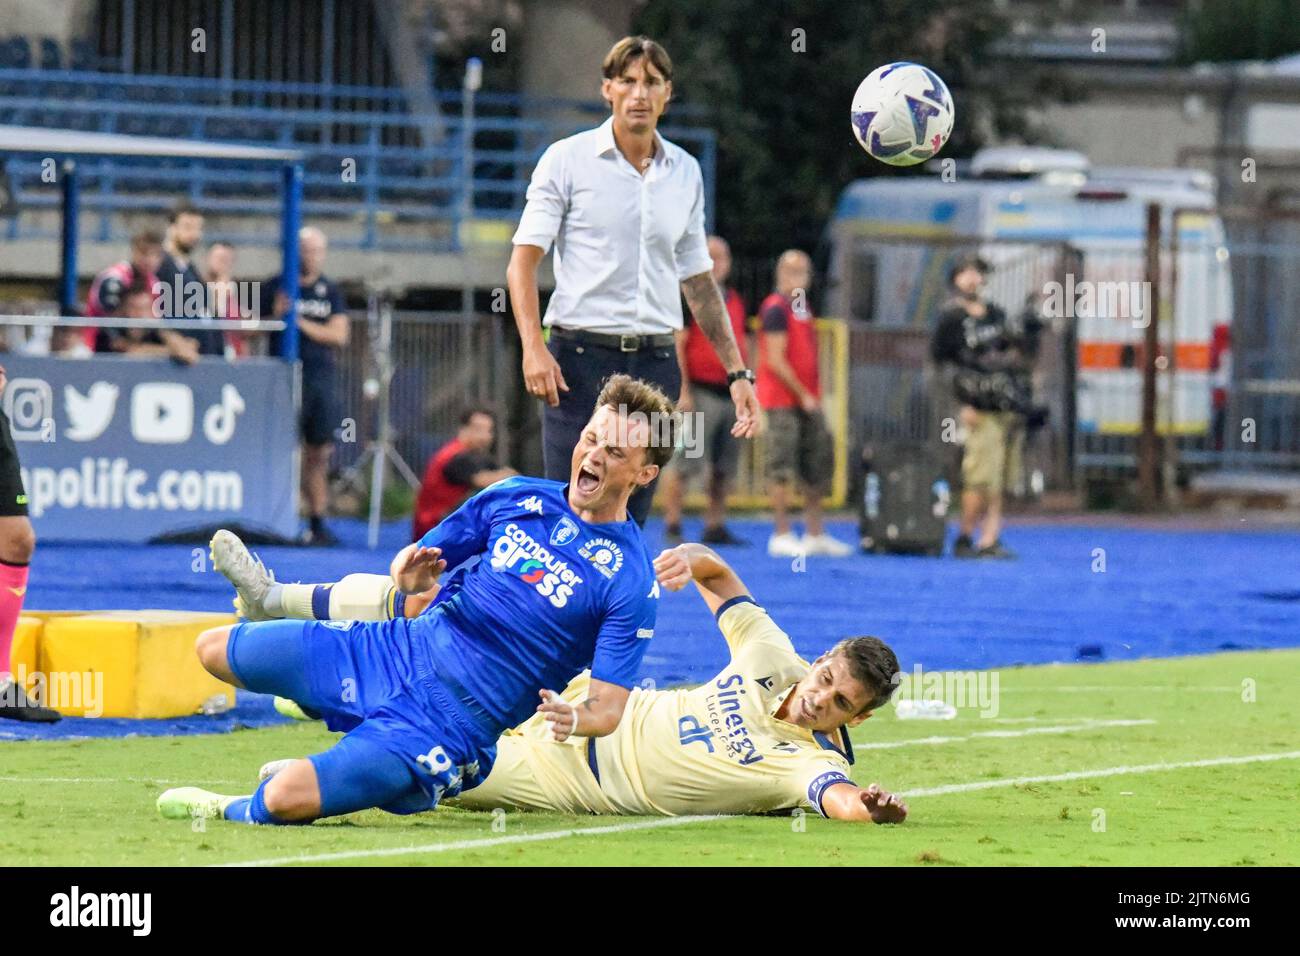 Empoli, Italy. 31st Aug, 2022. Empoliâ&#x80;&#x99;s Liam Henderson is fouled by Hellas Verona's Miguel Pinto Veloso during Empoli FC vs Hellas Verona, italian soccer Serie A match in Empoli, Italy, August 31 2022 Credit: Independent Photo Agency/Alamy Live News Stock Photo